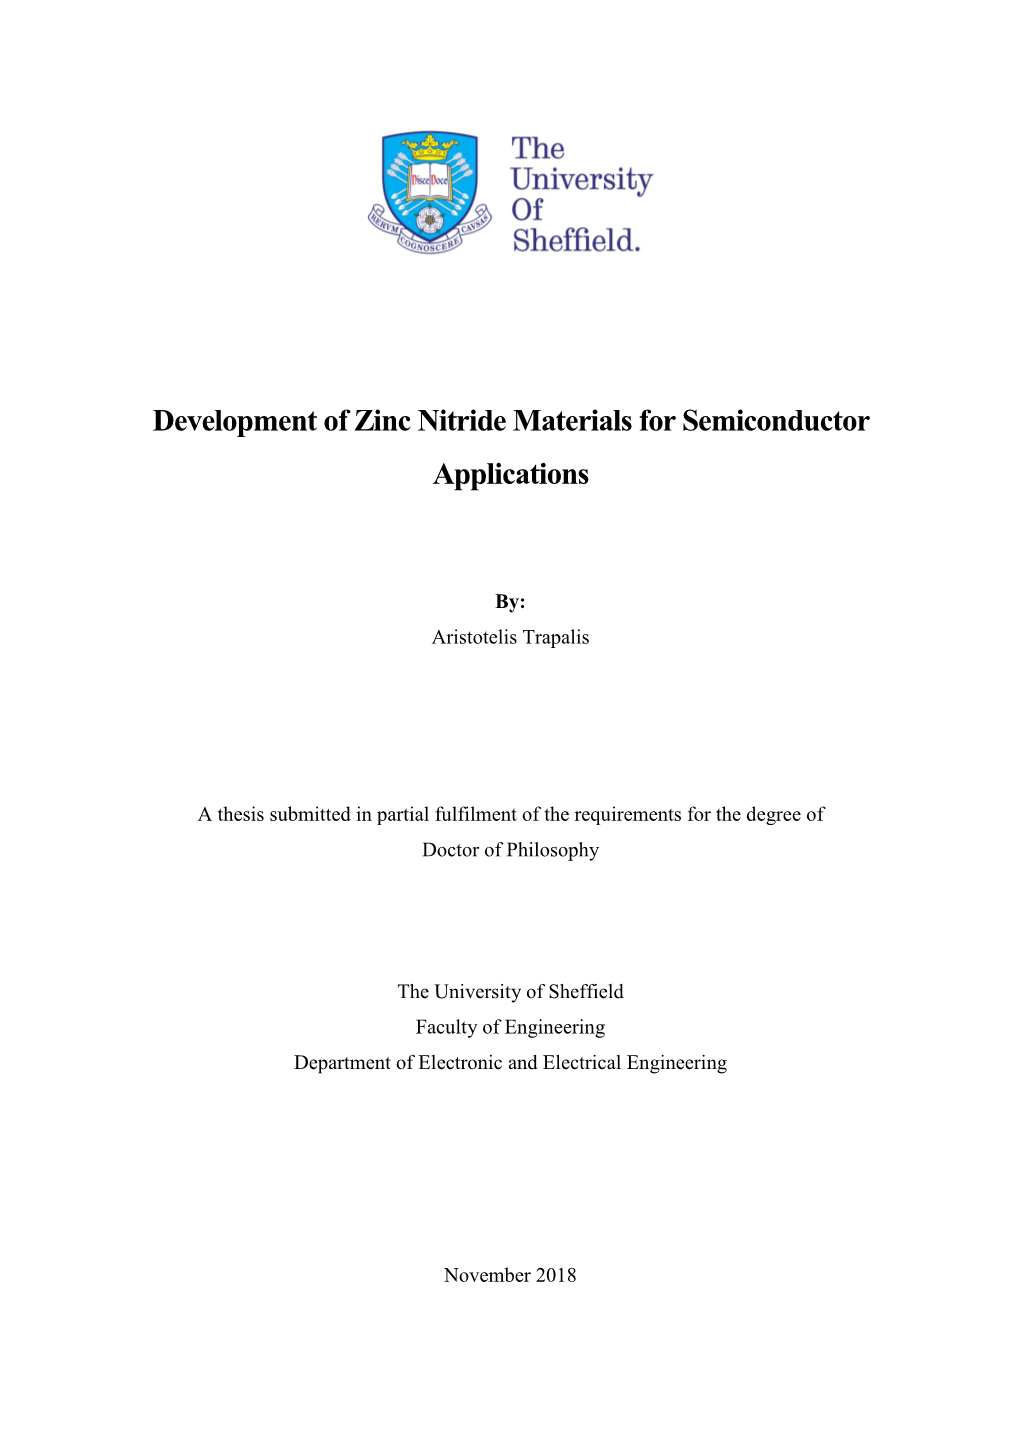 Development of Zinc Nitride Materials for Semiconductor Applications